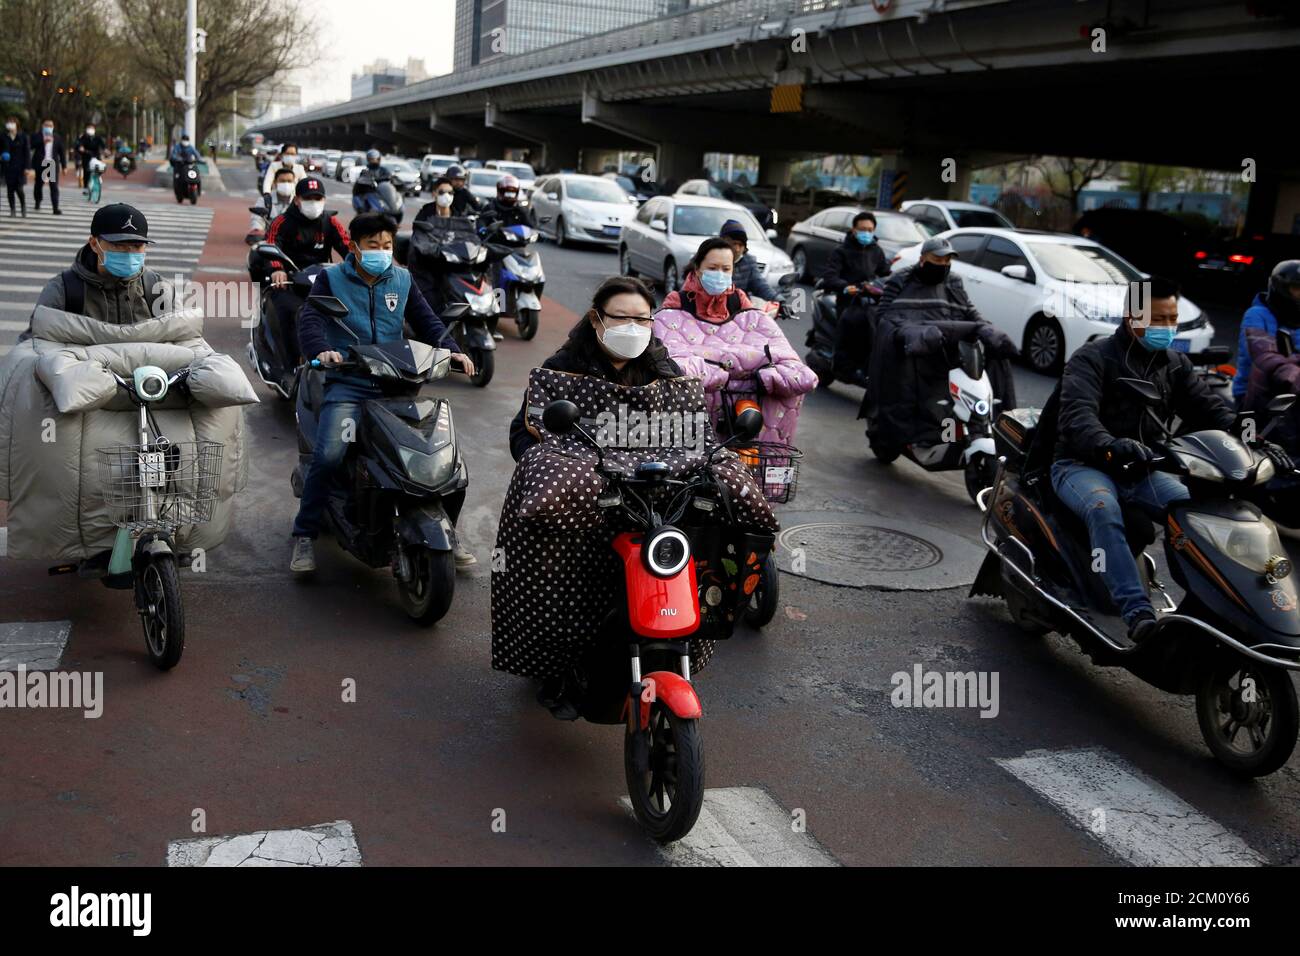 People wearing face masks are seen at Beijing's Financial Street during evening rush hour, as the country is hit by an outbreak of the novel coronavirus disease (COVID-19), China April 8, 2020. REUTERS/Tingshu Wang Stock Photo